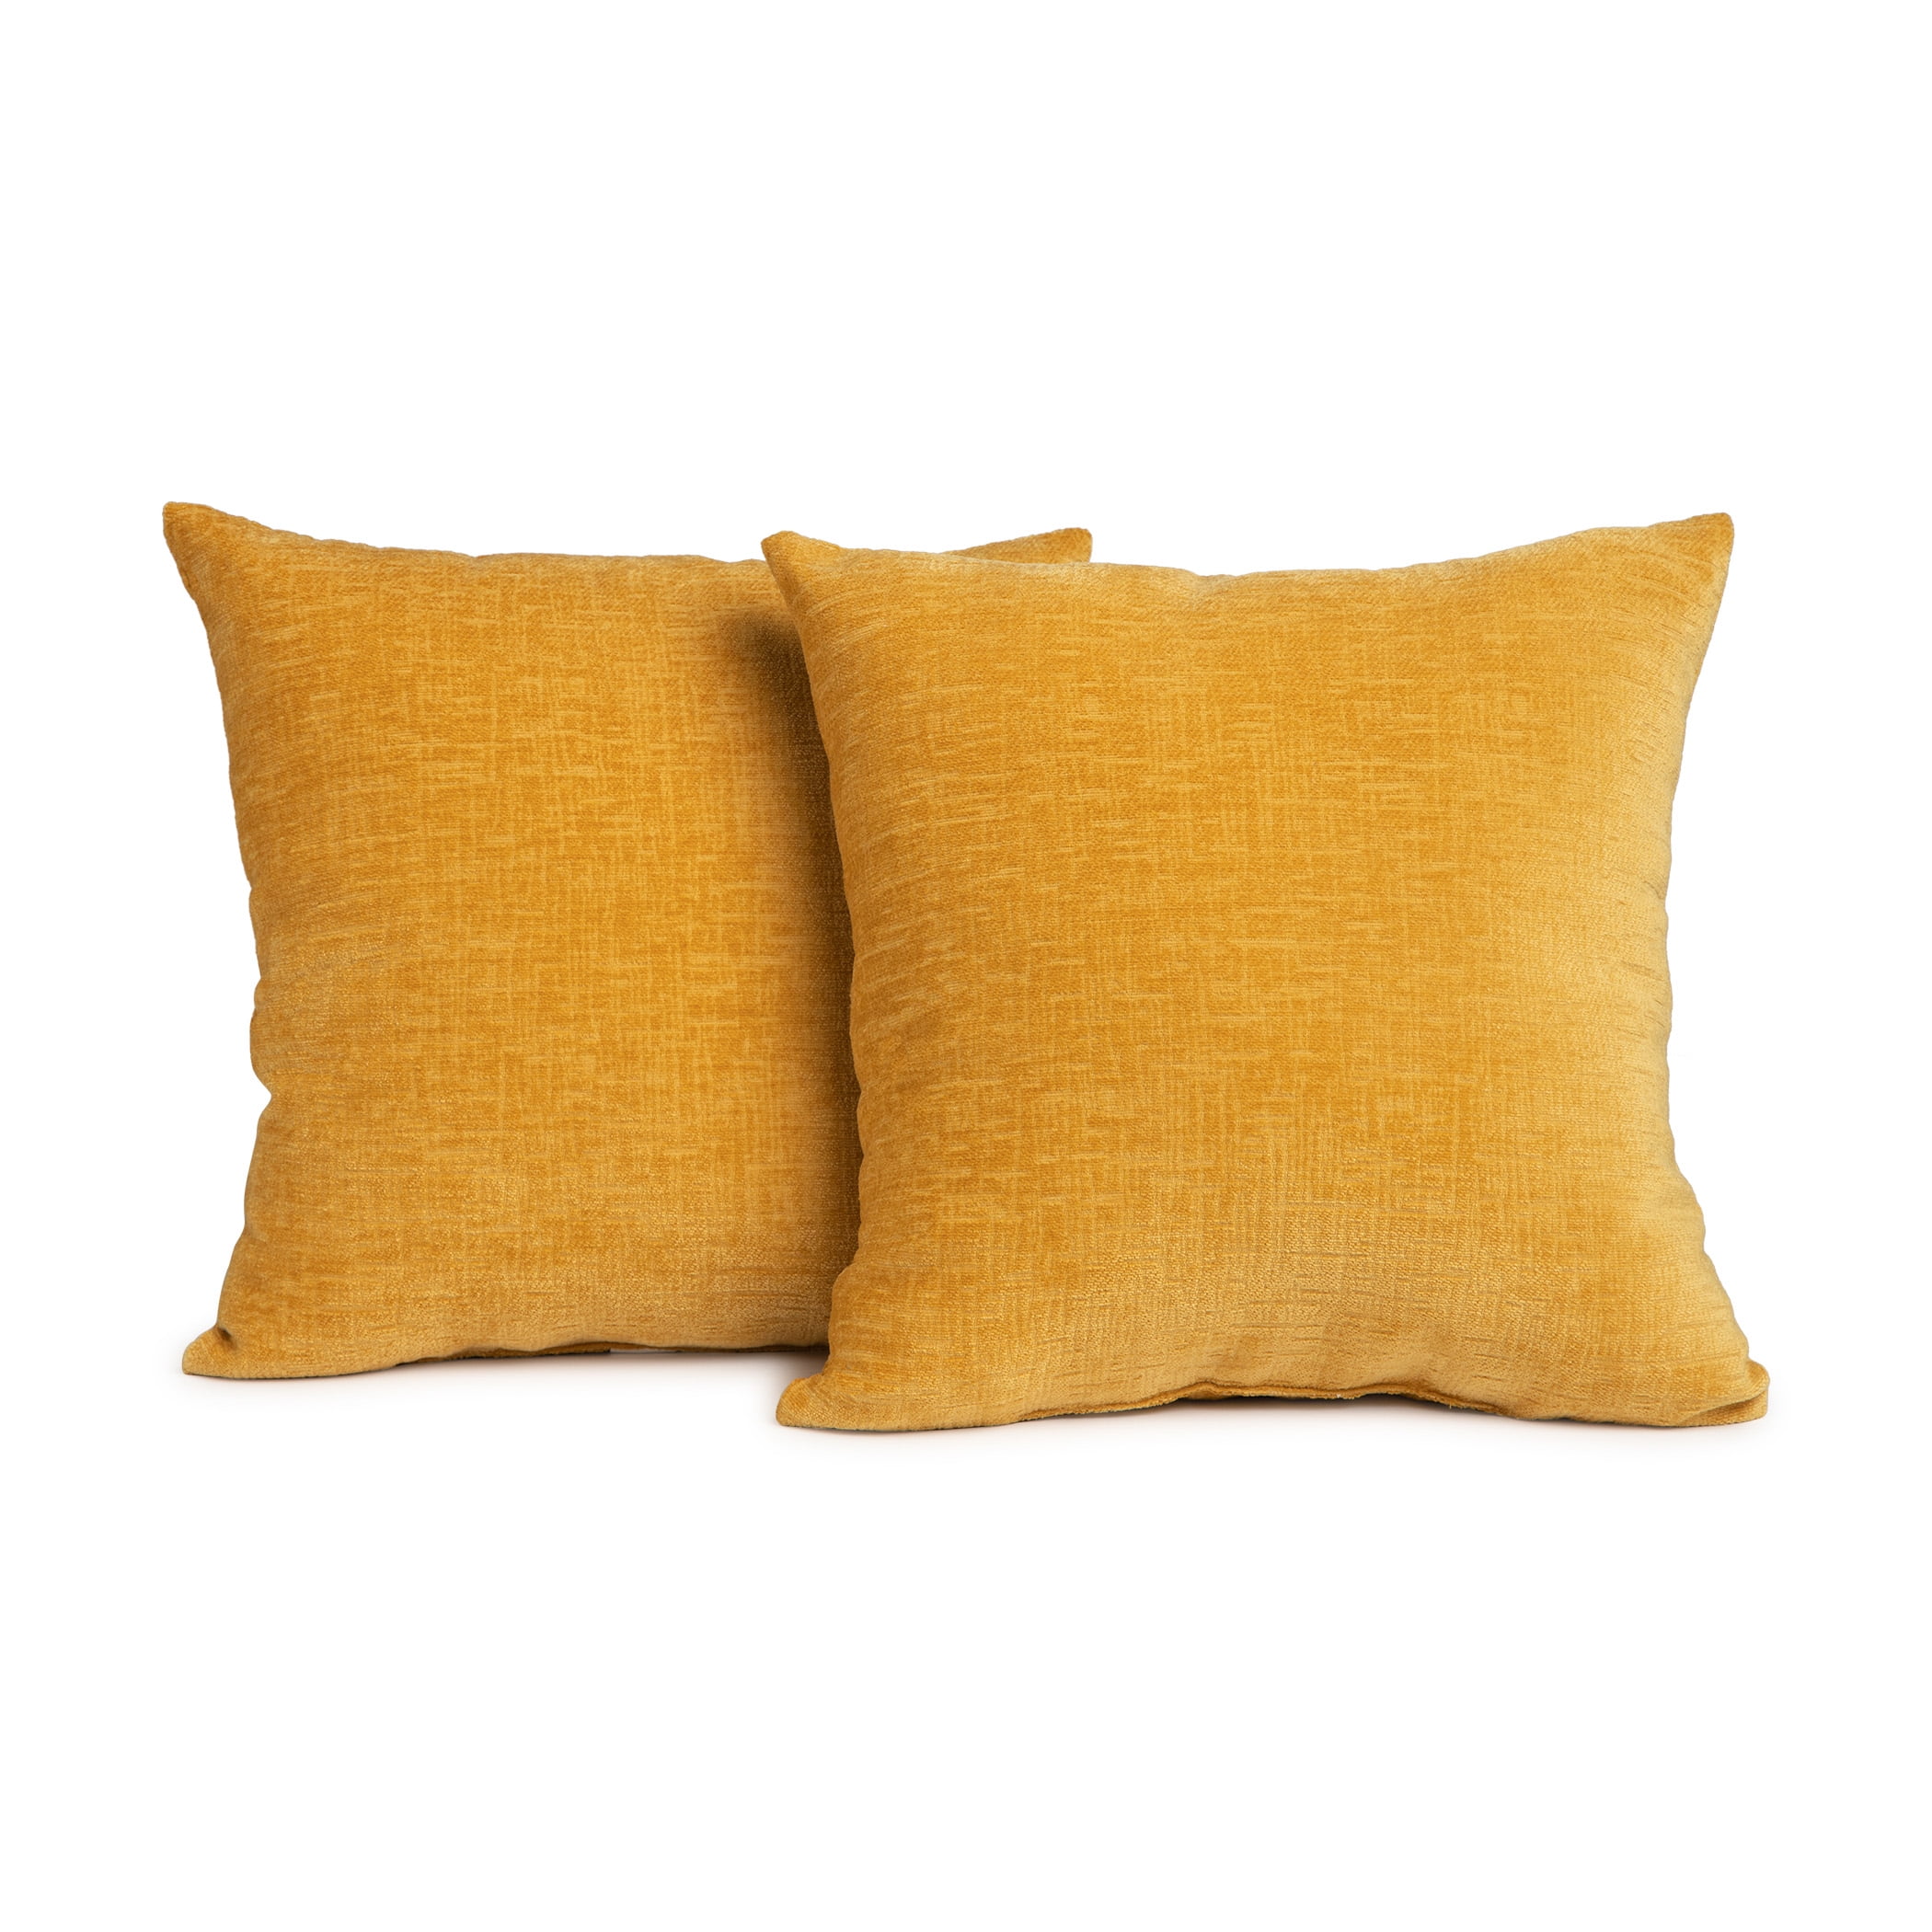 Mainstays, Chenille Decorative Square Pillow, 18" x 18", Yellow, 2 Pack